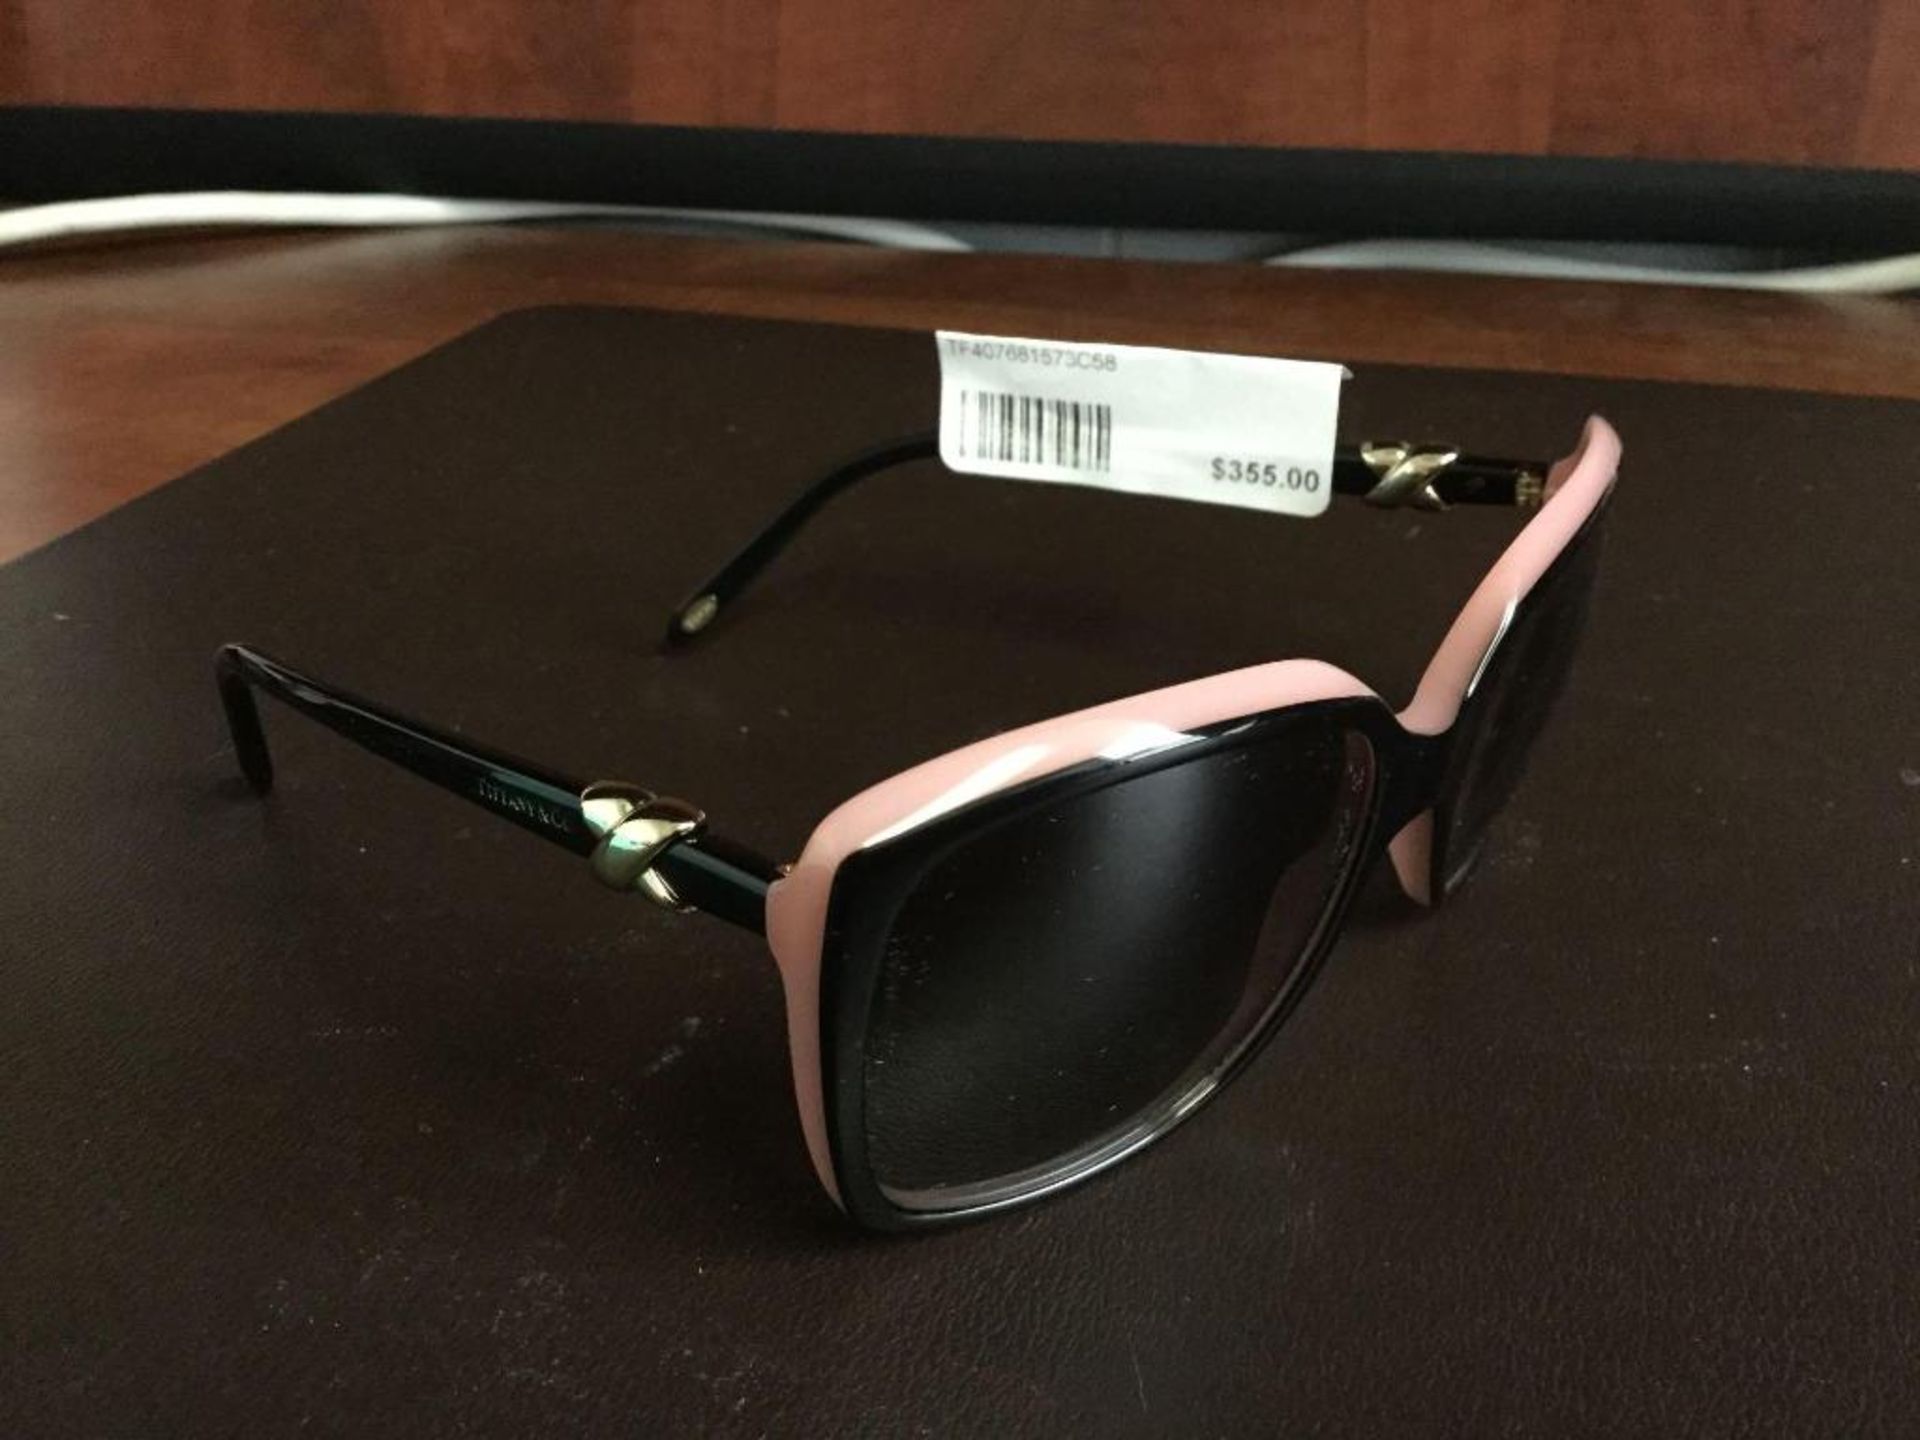 Tiffany Sunglasses with Case, Box, and bag Value $ 355 - Image 2 of 2